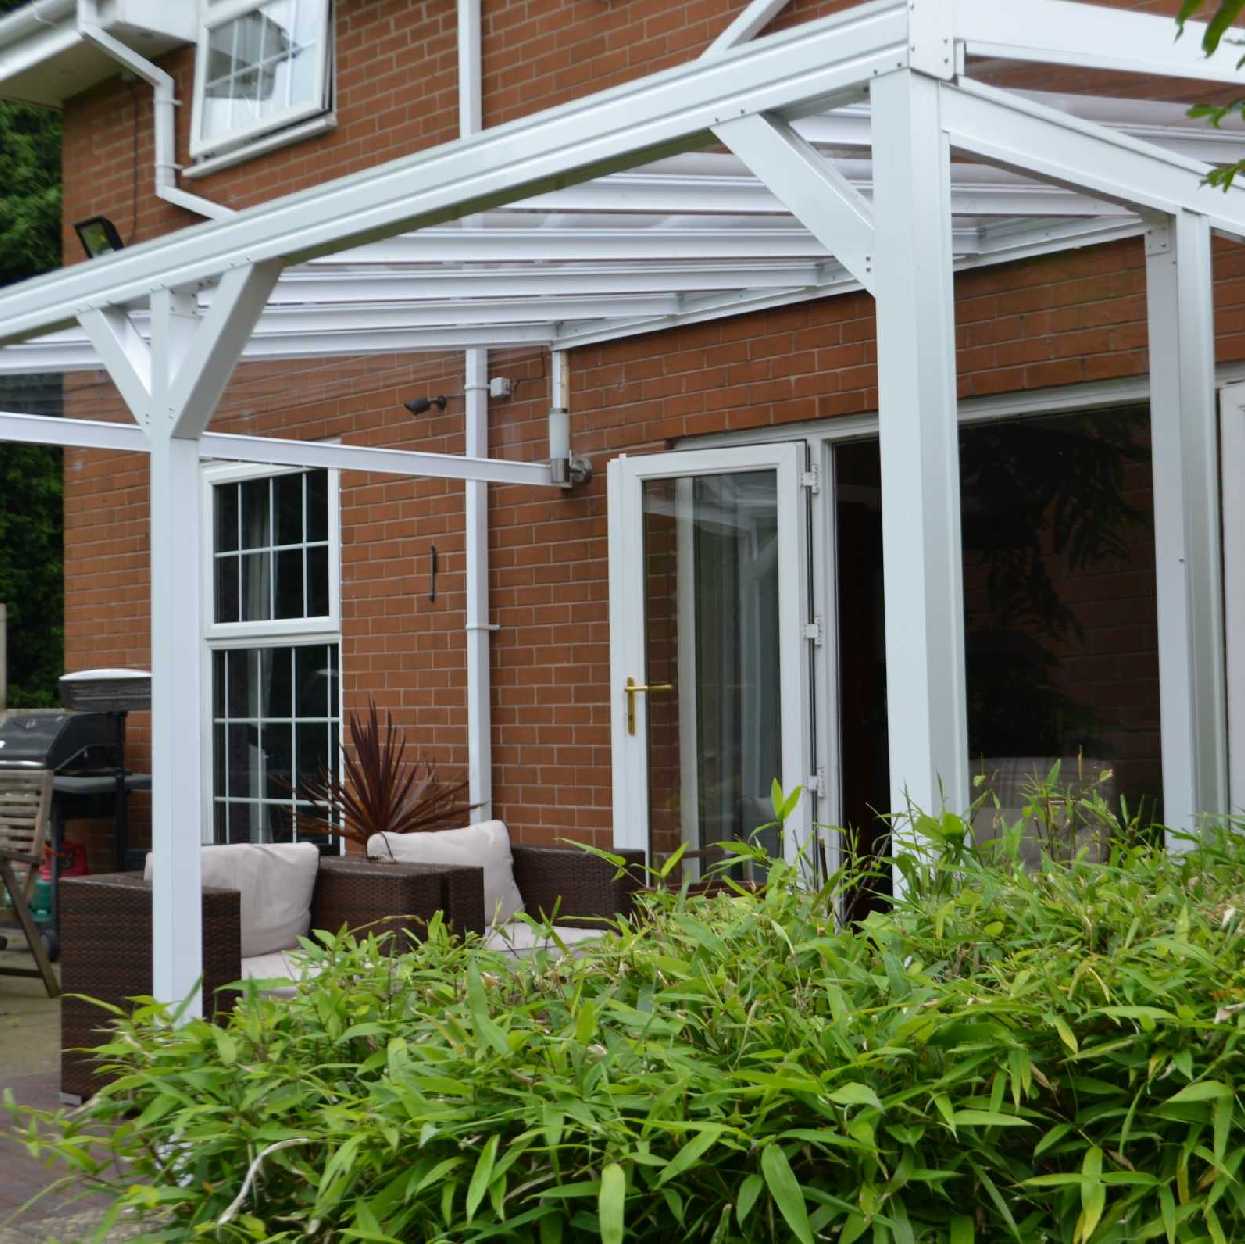 Omega Smart Lean-To Canopy, White with 6mm Glass Clear Plate Polycarbonate Glazing - 9.8m (W) x 2.5m (P), (5) Supporting Posts from Omega Build